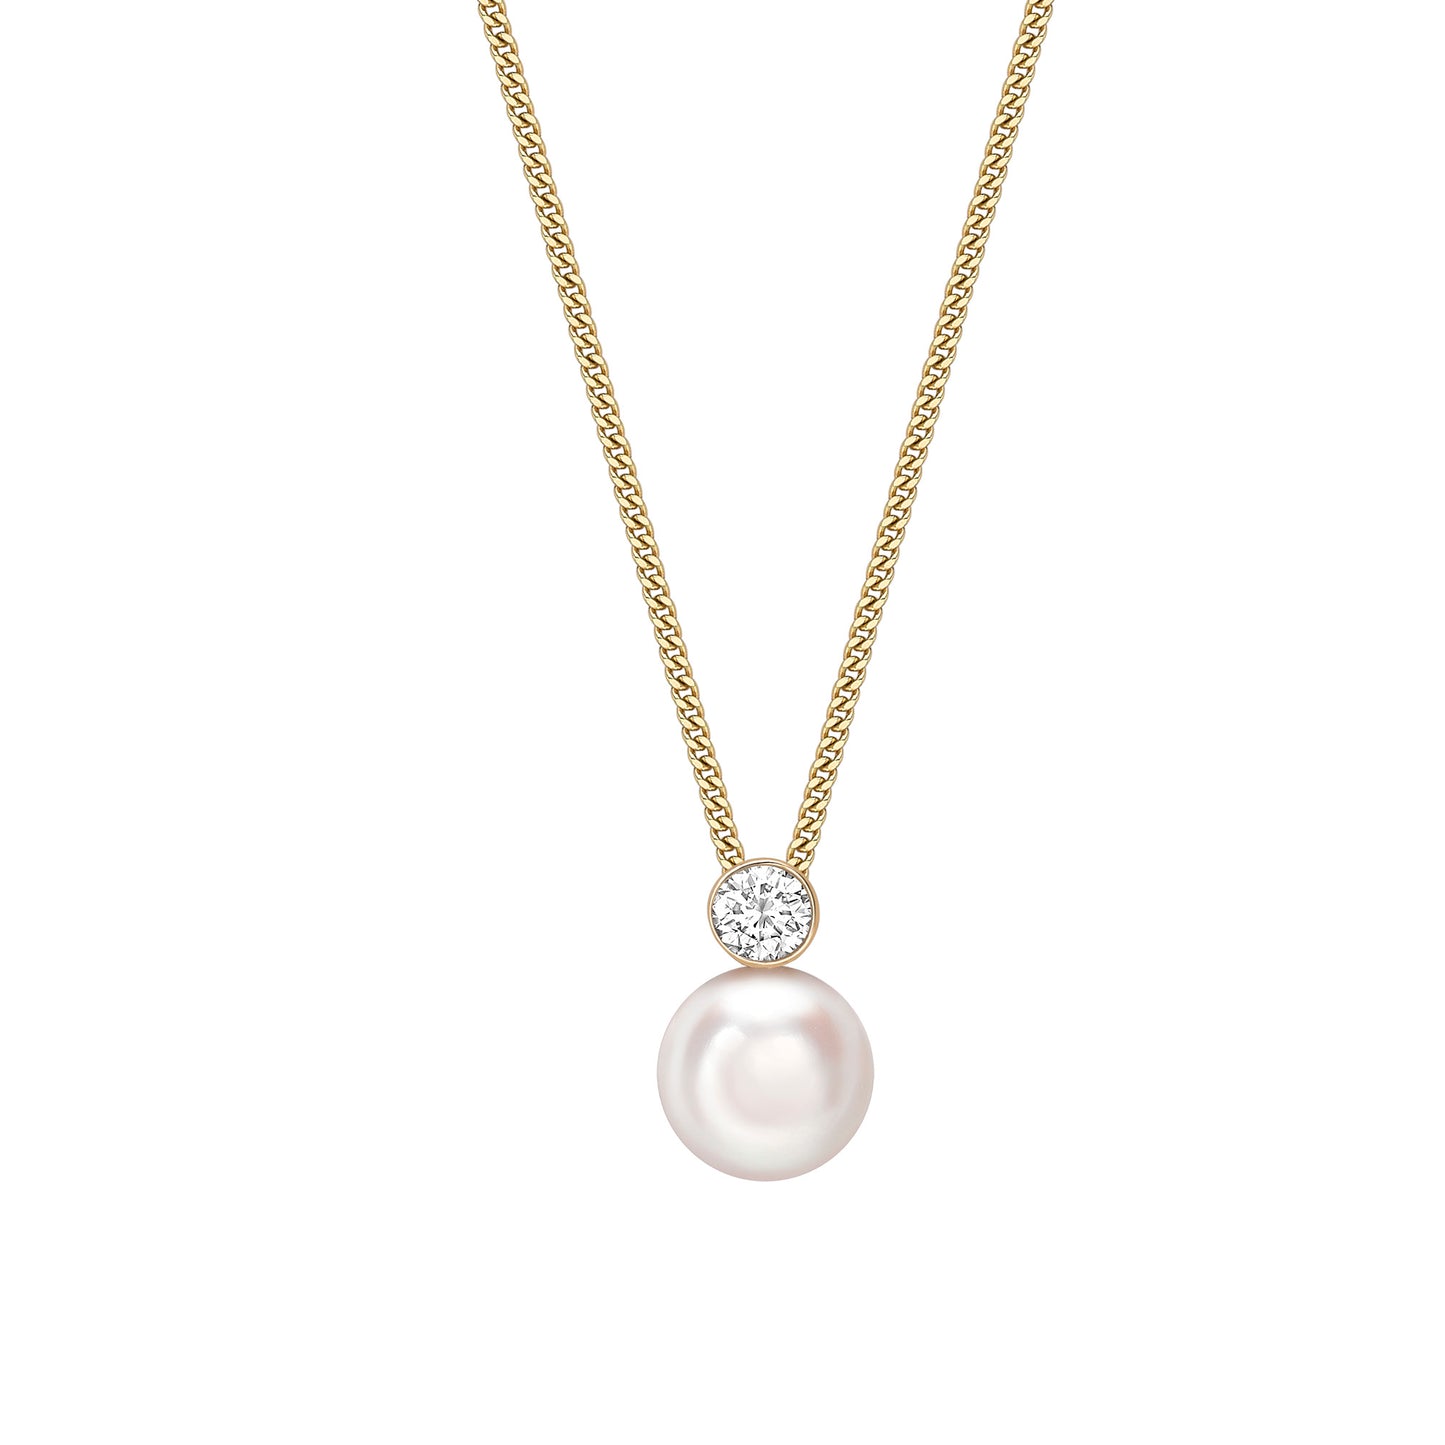 18ct Yellow Gold Pearl & Solitaire Necklace, 0.20ct